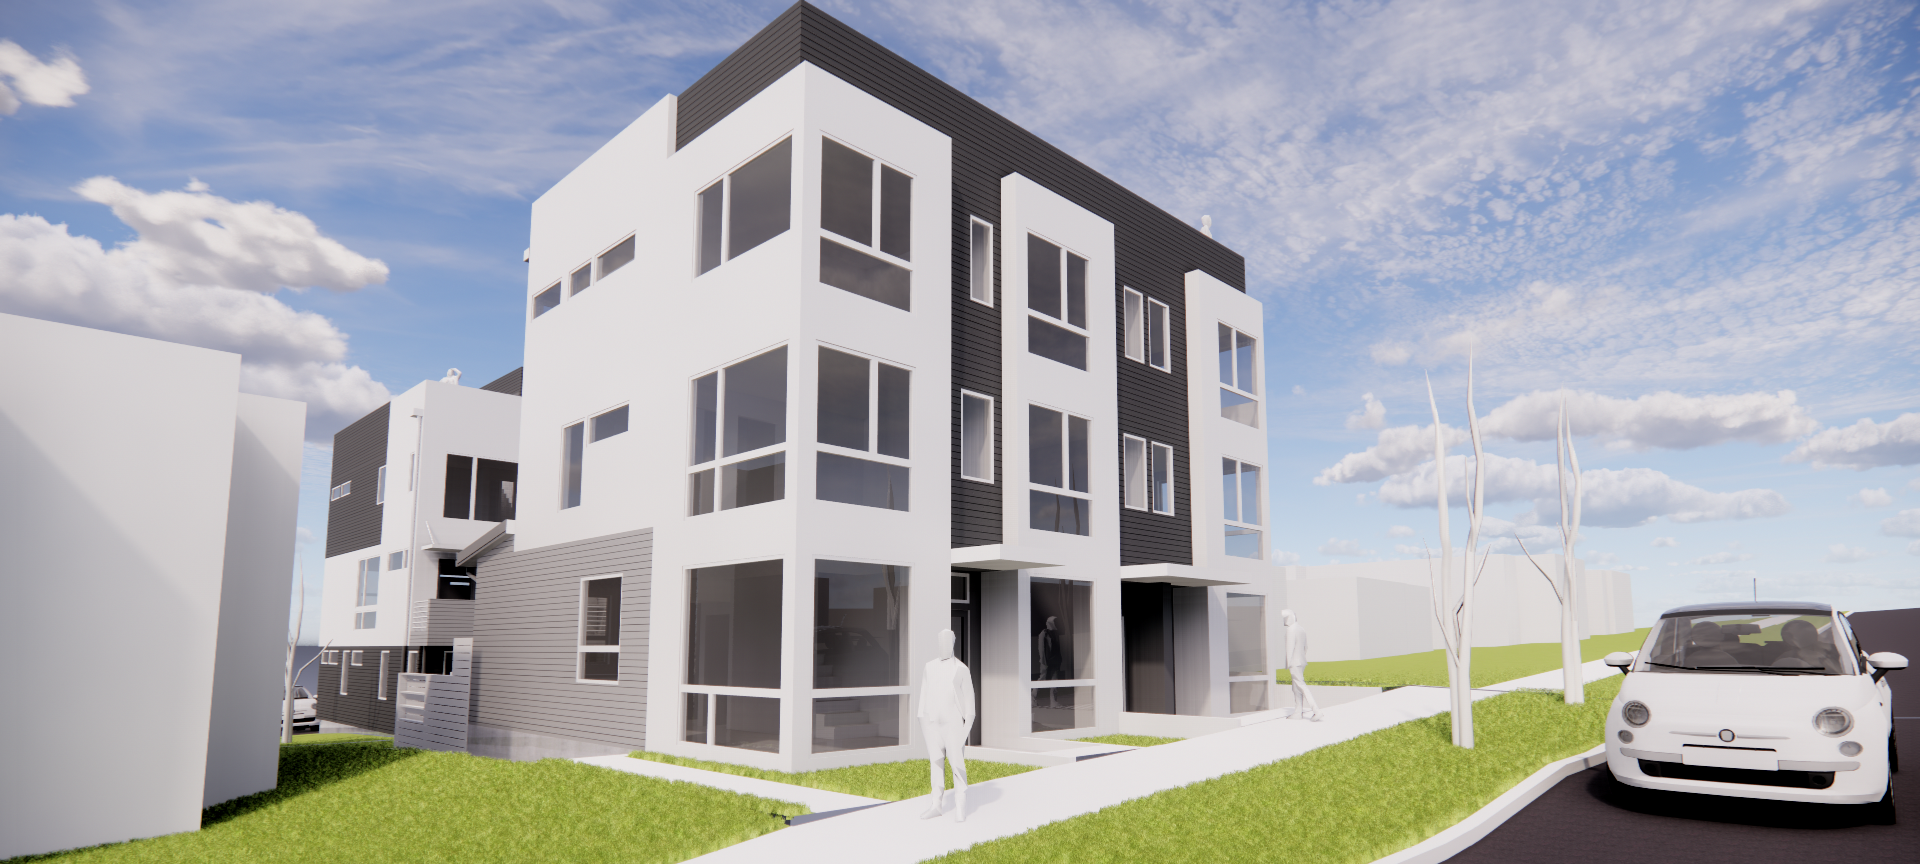 Morgan Junction Townhouses - On the Boards